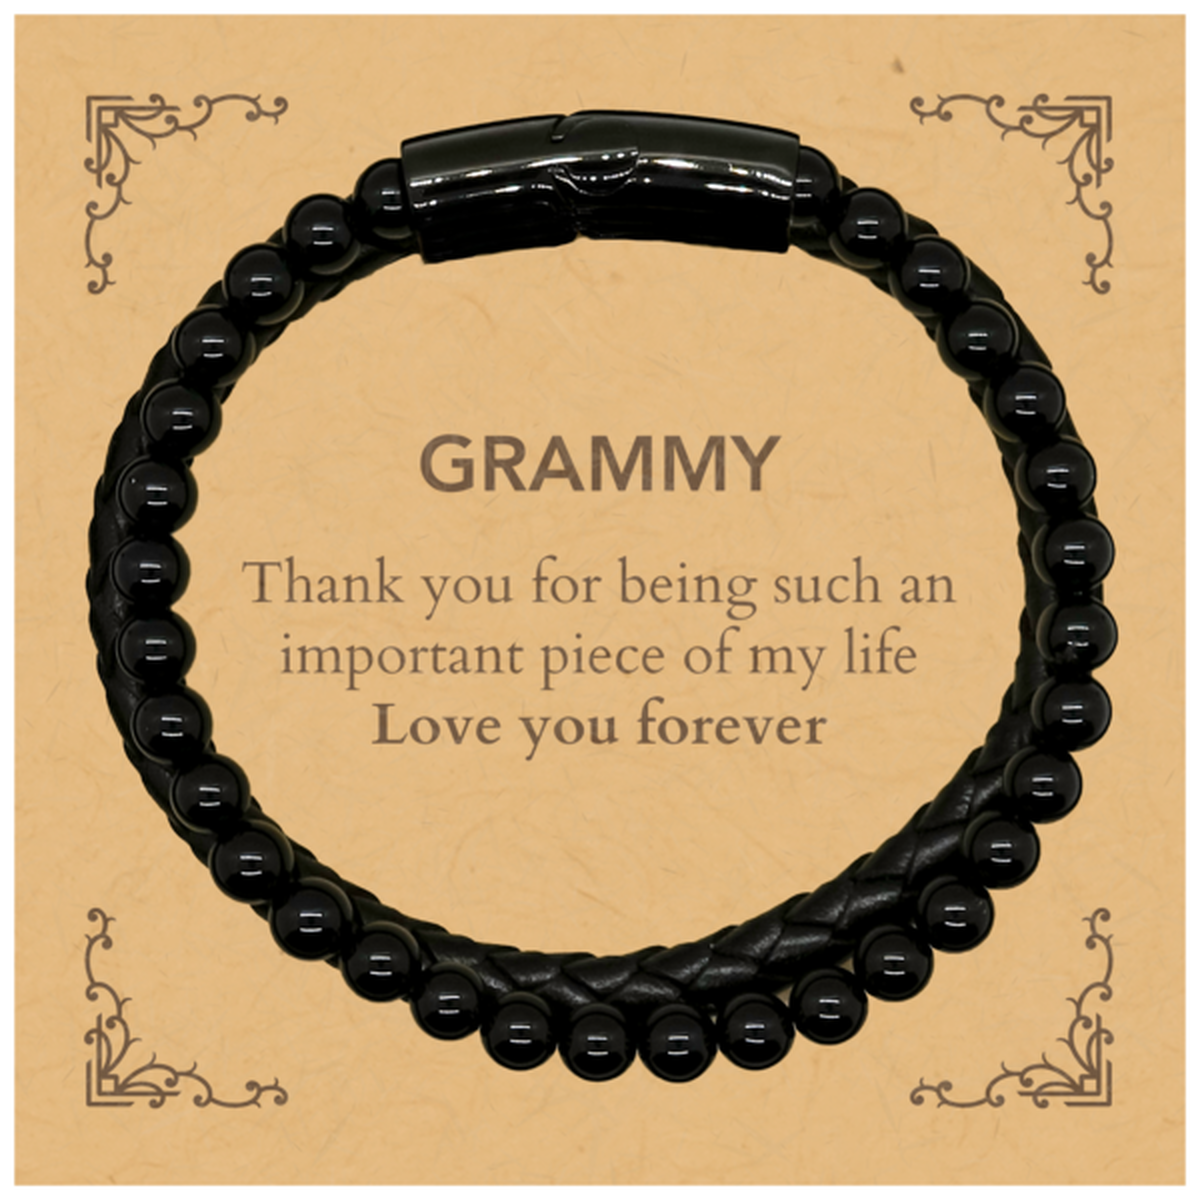 Appropriate Grammy Stone Leather Bracelets Epic Birthday Gifts for Grammy Thank you for being such an important piece of my life Grammy Christmas Mothers Fathers Day